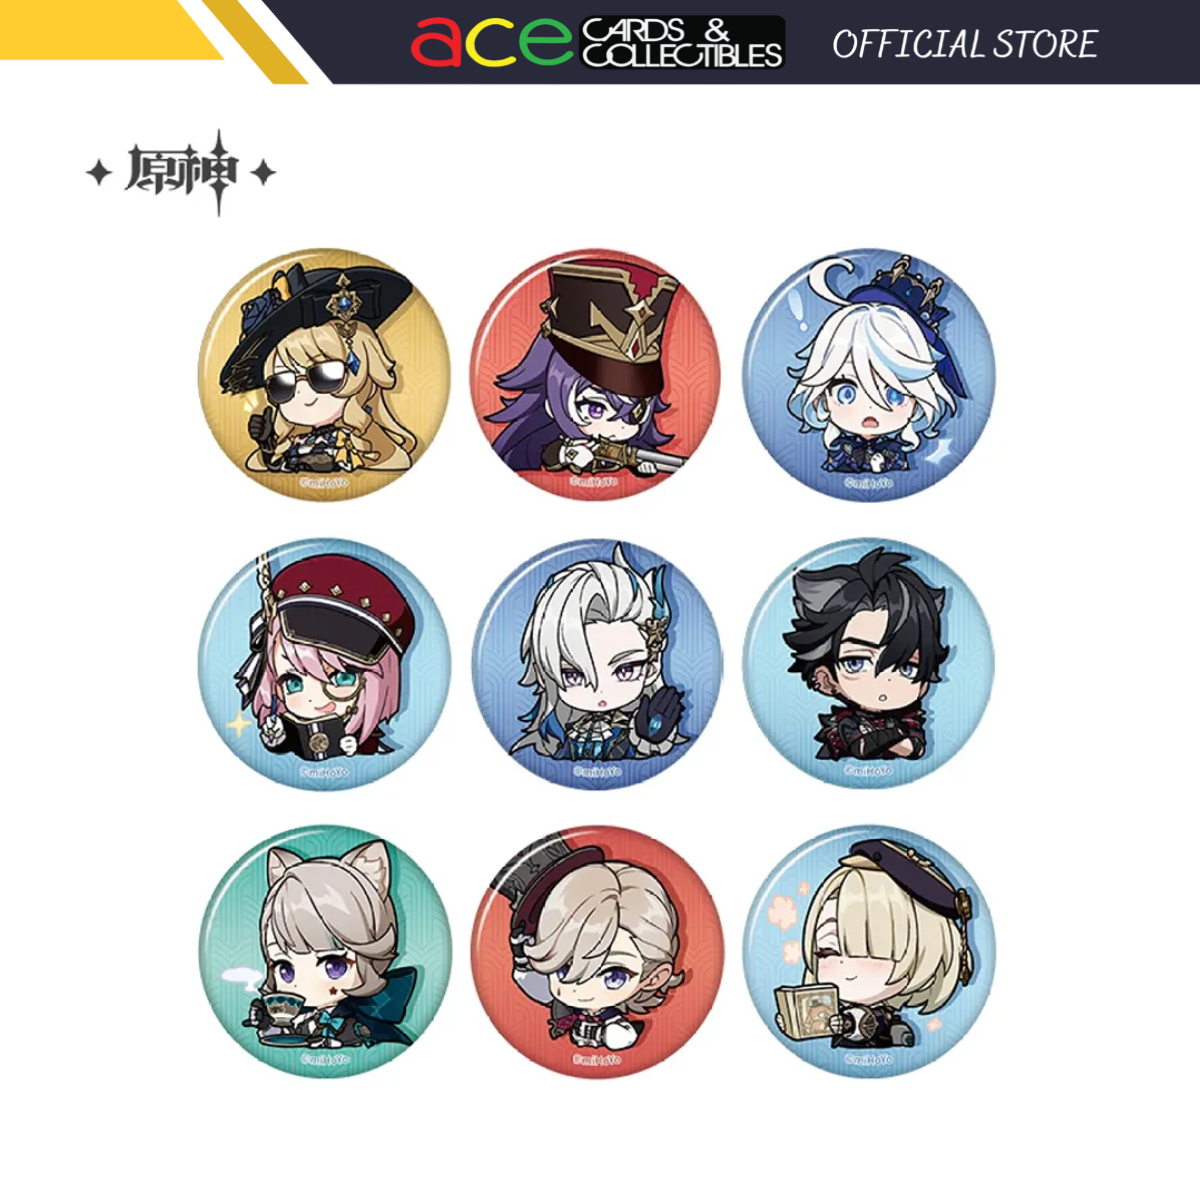 miHoYo Genshin Impact Chibi Fontaine Character Expression Sticker Badge-Neuvillette-miHoYo-Ace Cards & Collectibles